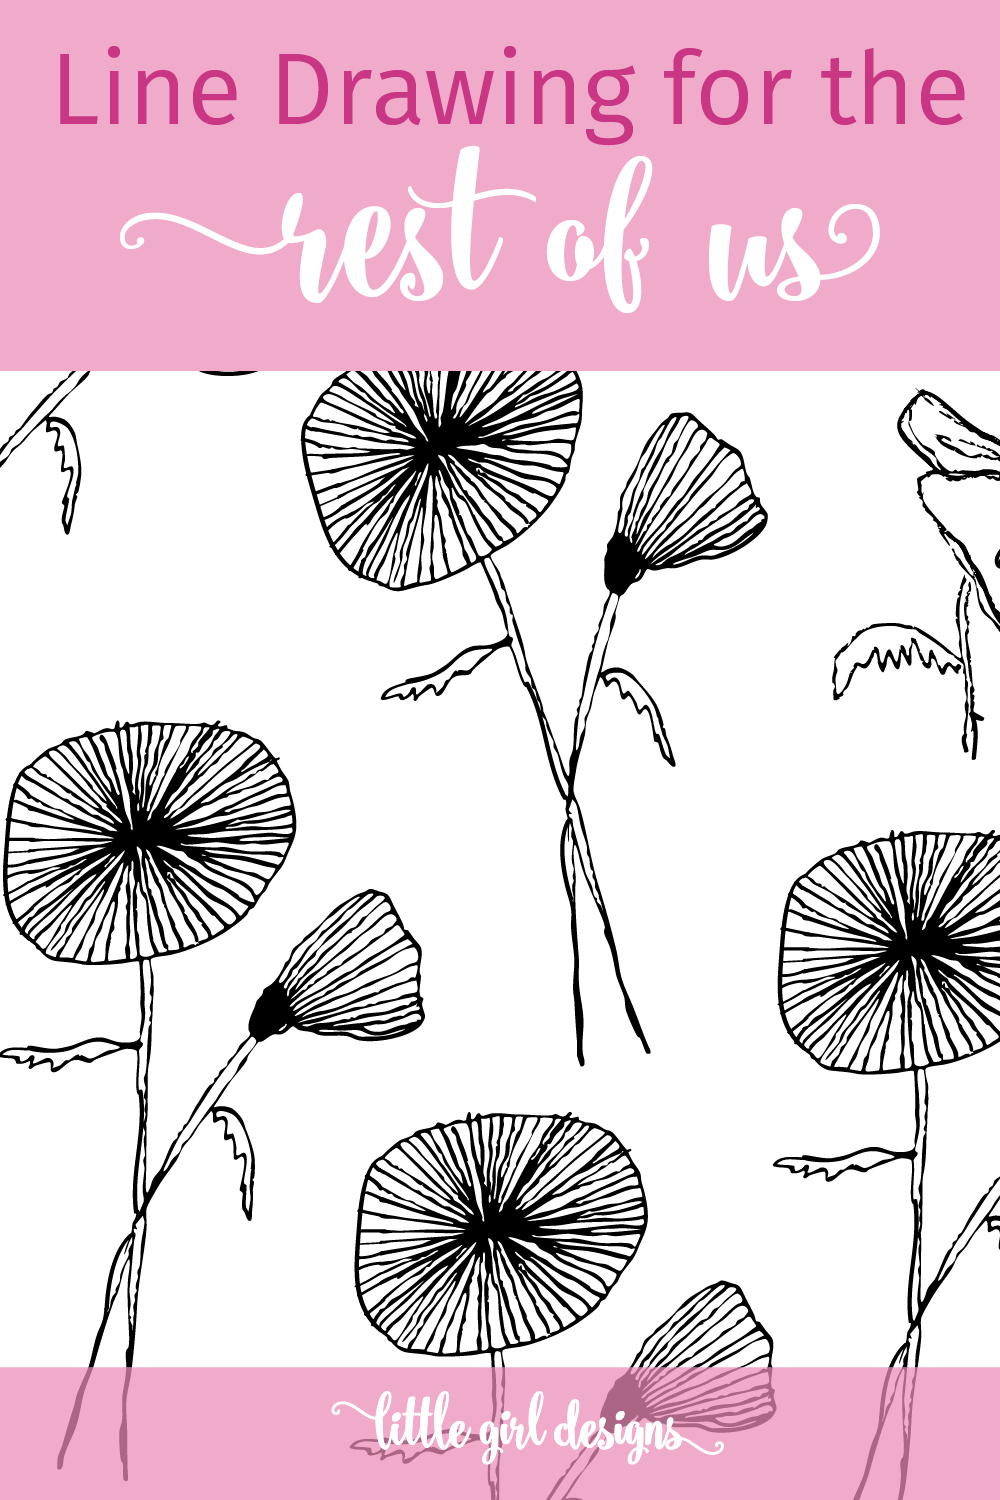 Have you ever wanted to learn how to make whimsical illustrations? Click to learn about a course that taught me how to make these flower illustrations. It was so much fun (and really easy too!)